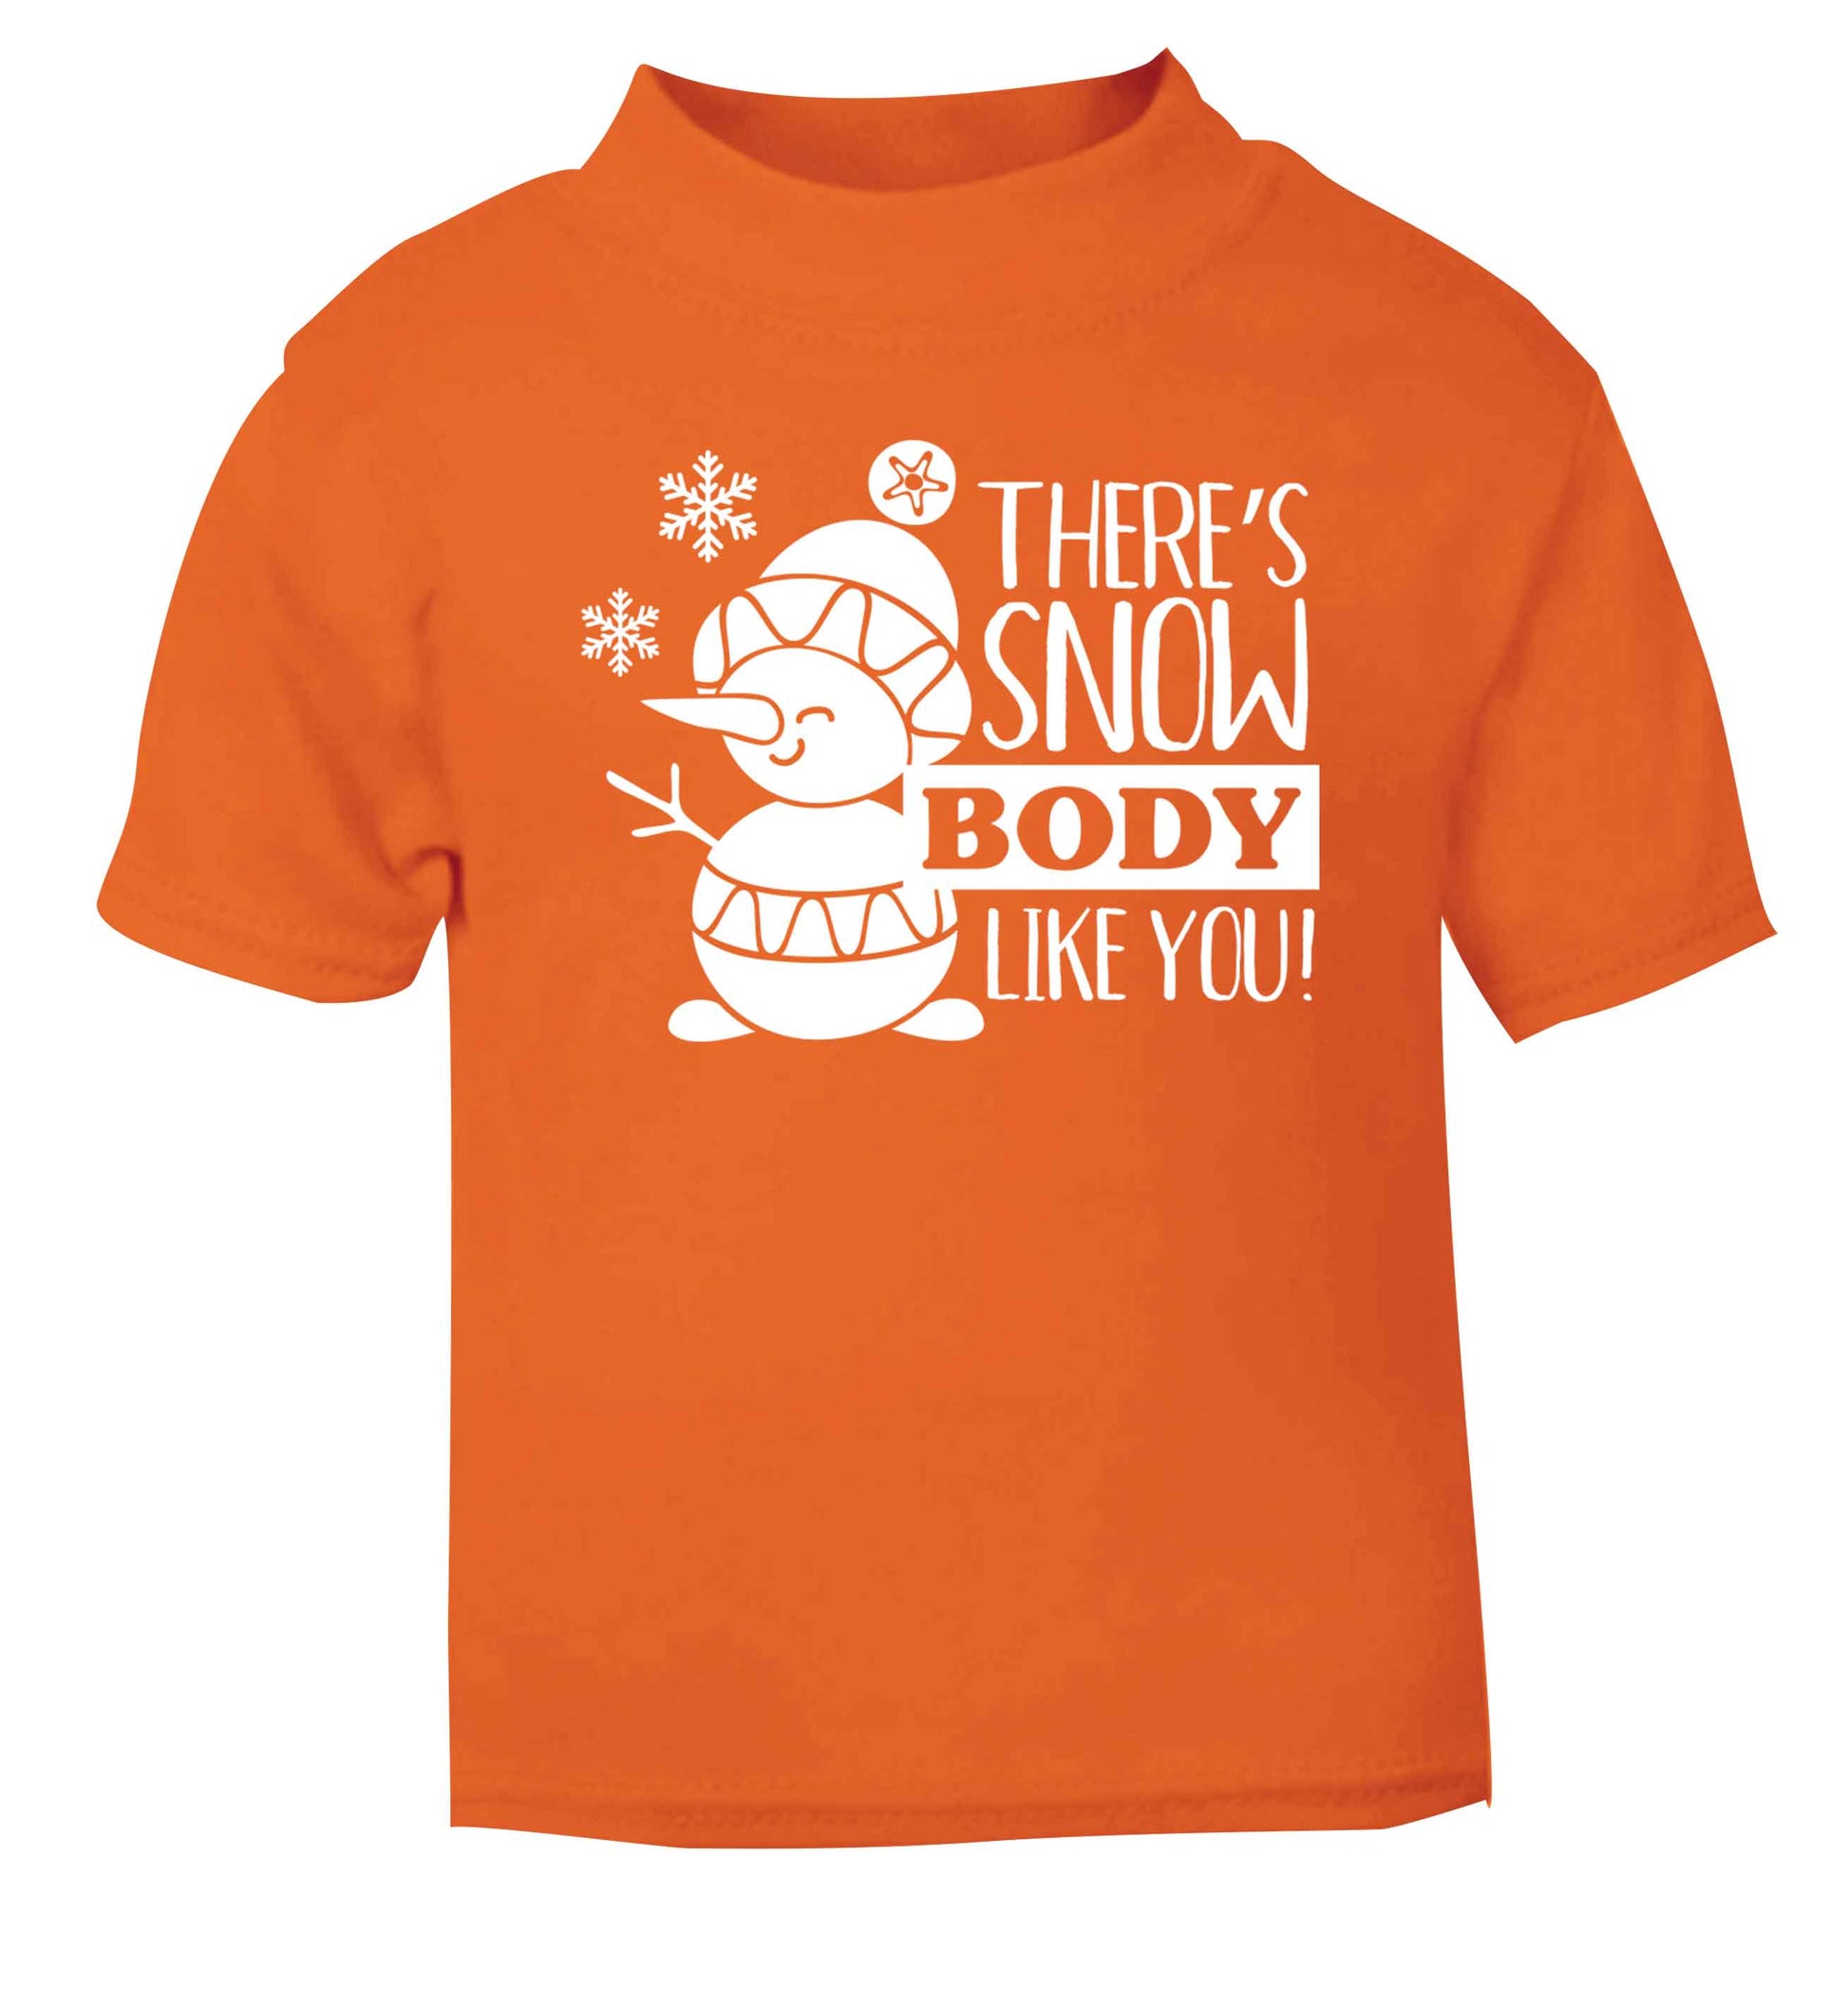 There's snow body like you orange baby toddler Tshirt 2 Years